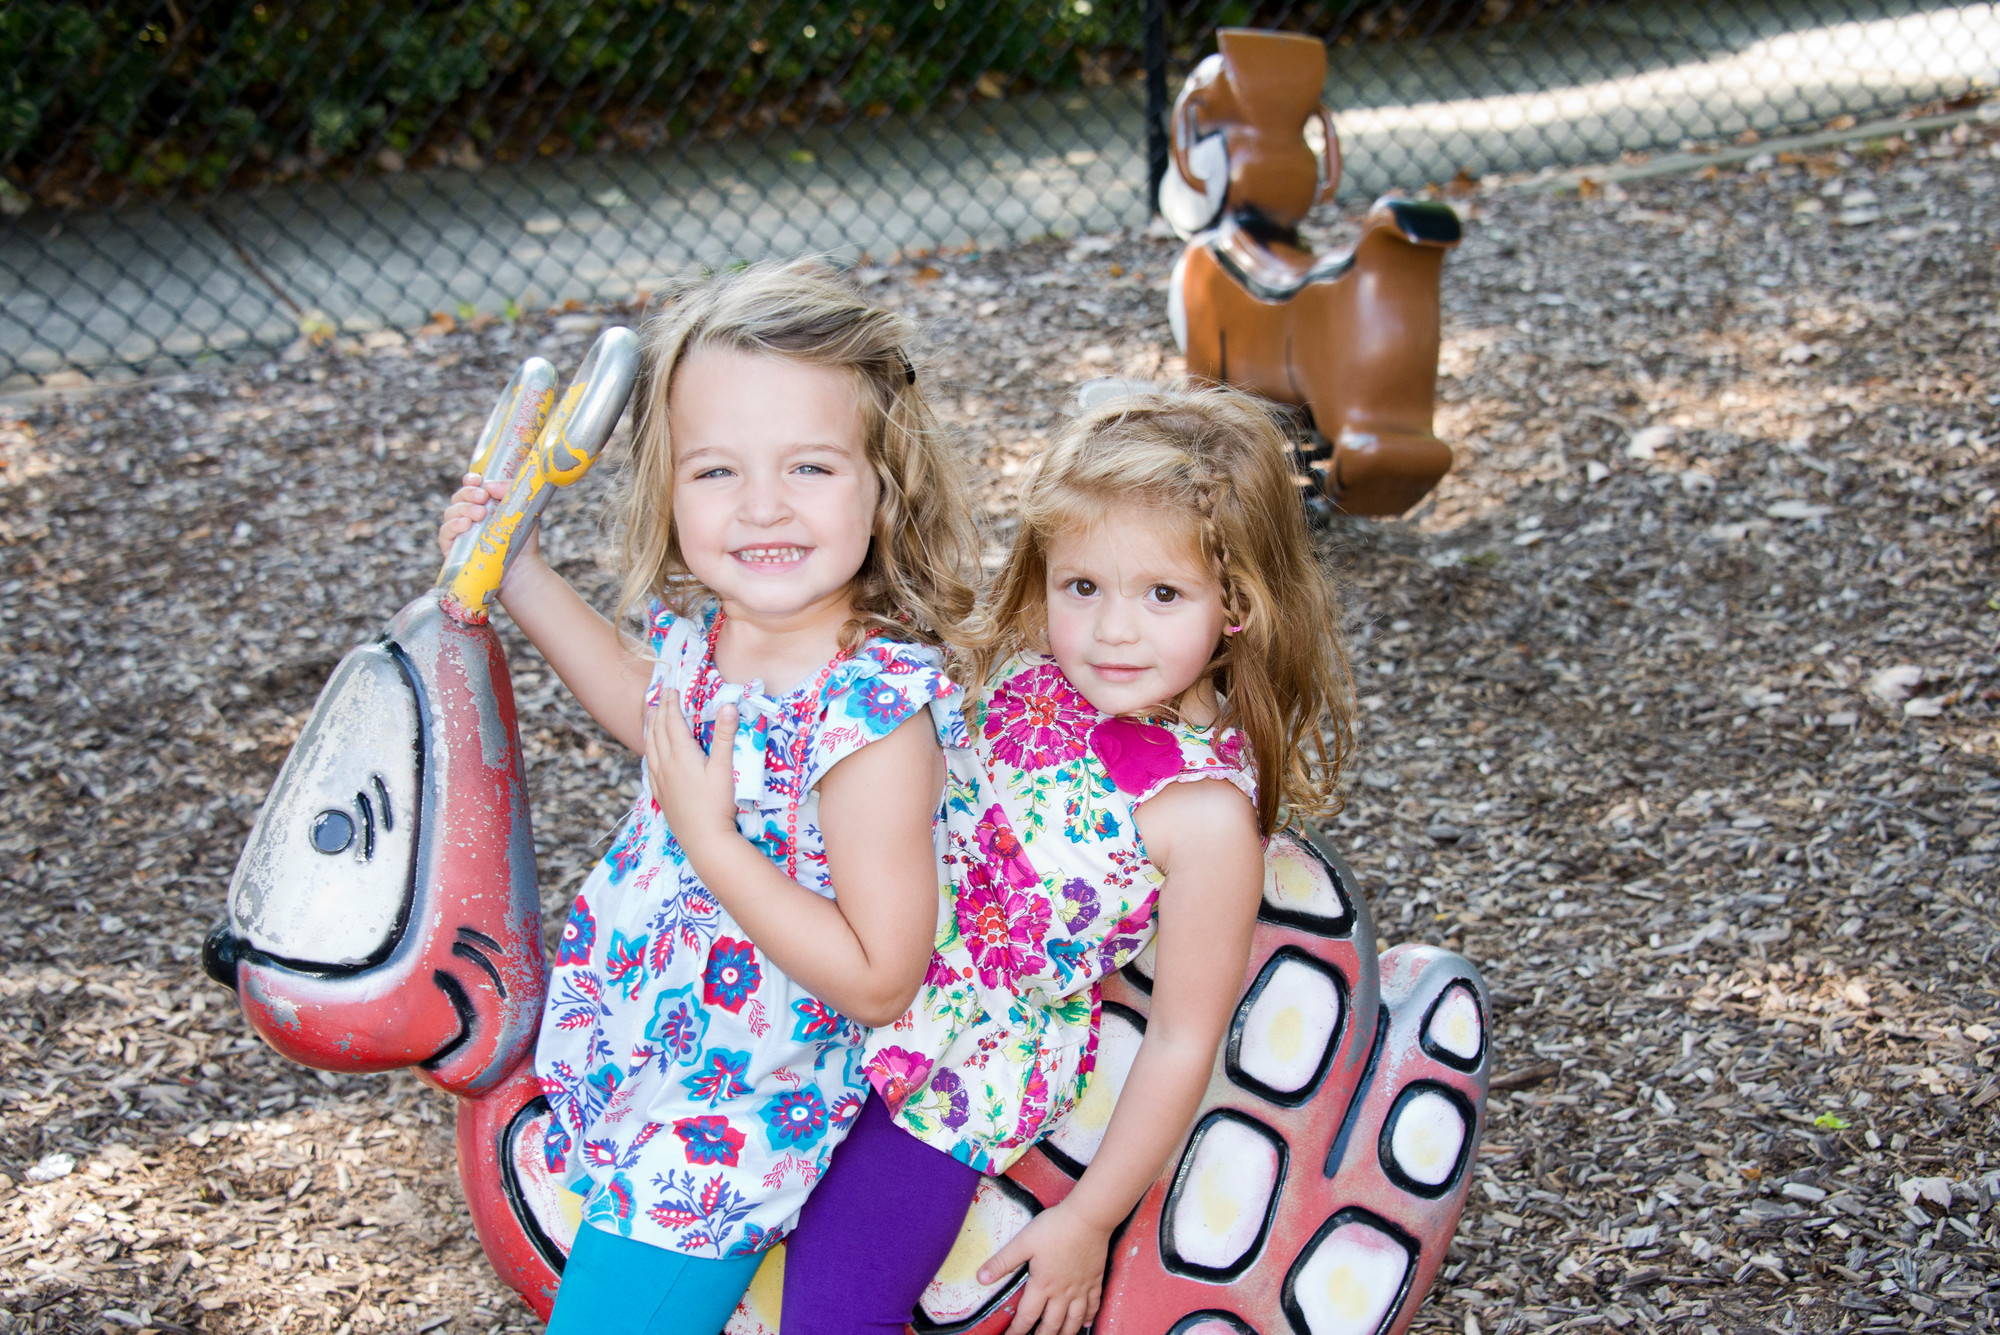 Gianna Fabris and Alex petrone, both 3, played together on the Rec Center playground last weekend.